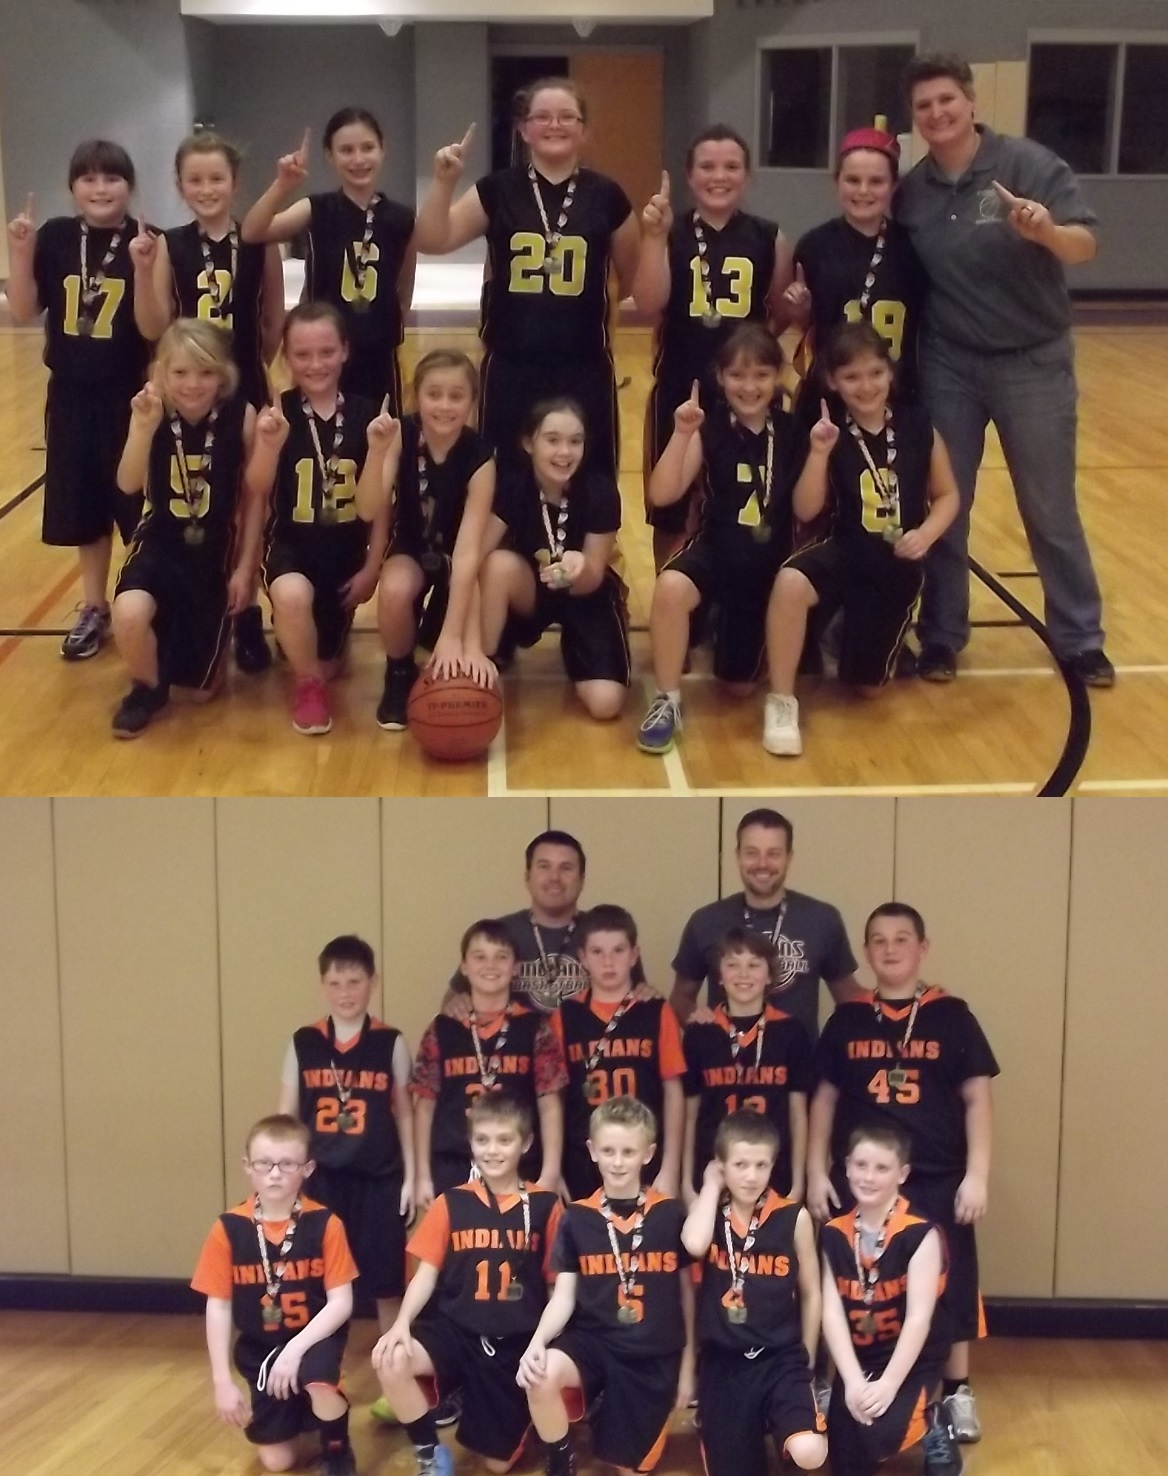 WYTHE COUNTY WRAPS UP YOUTH BASKETBALL SEASON WITH CHAMPIONSHIP GAMES